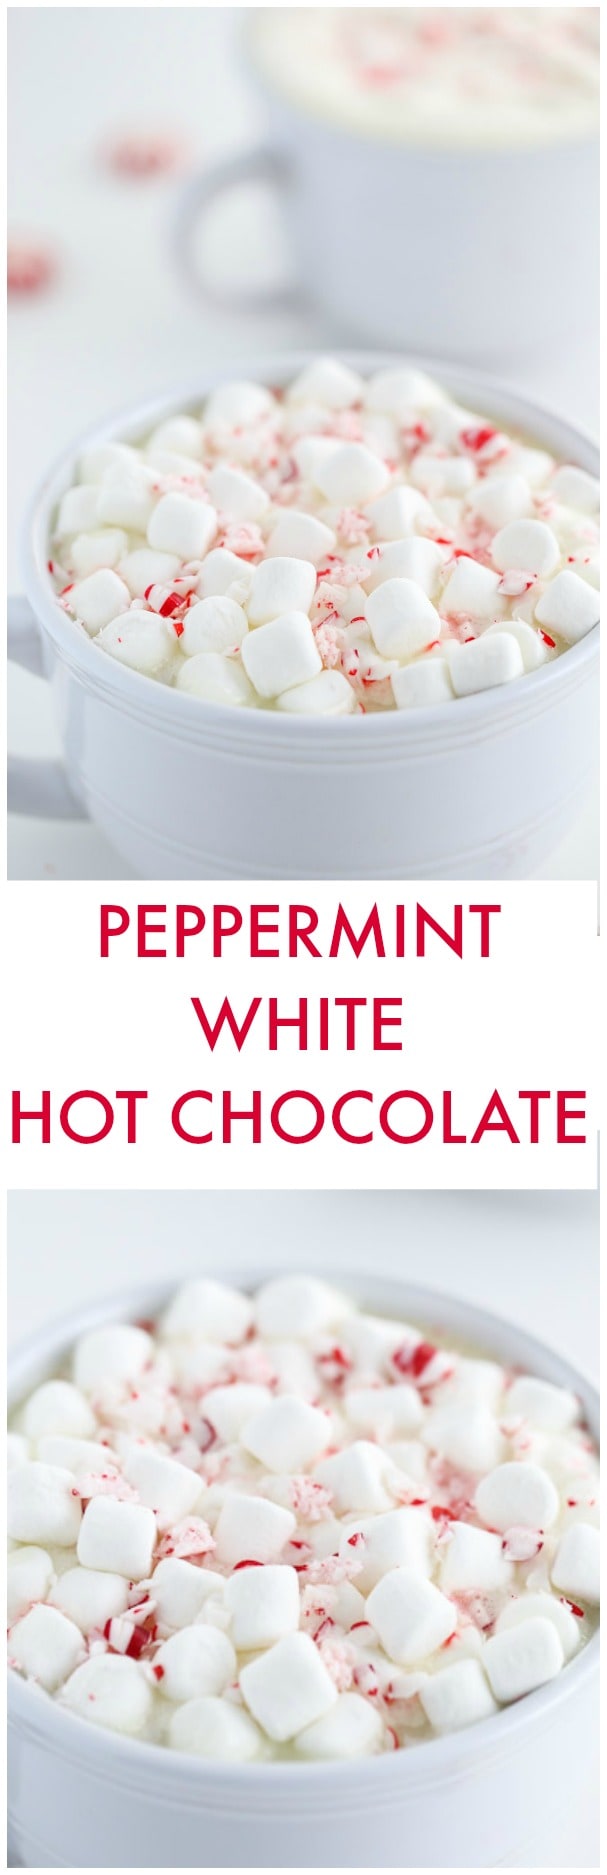 A simple homemade recipe for peppermint white hot chocolate. It's sweet, creamy and warm.